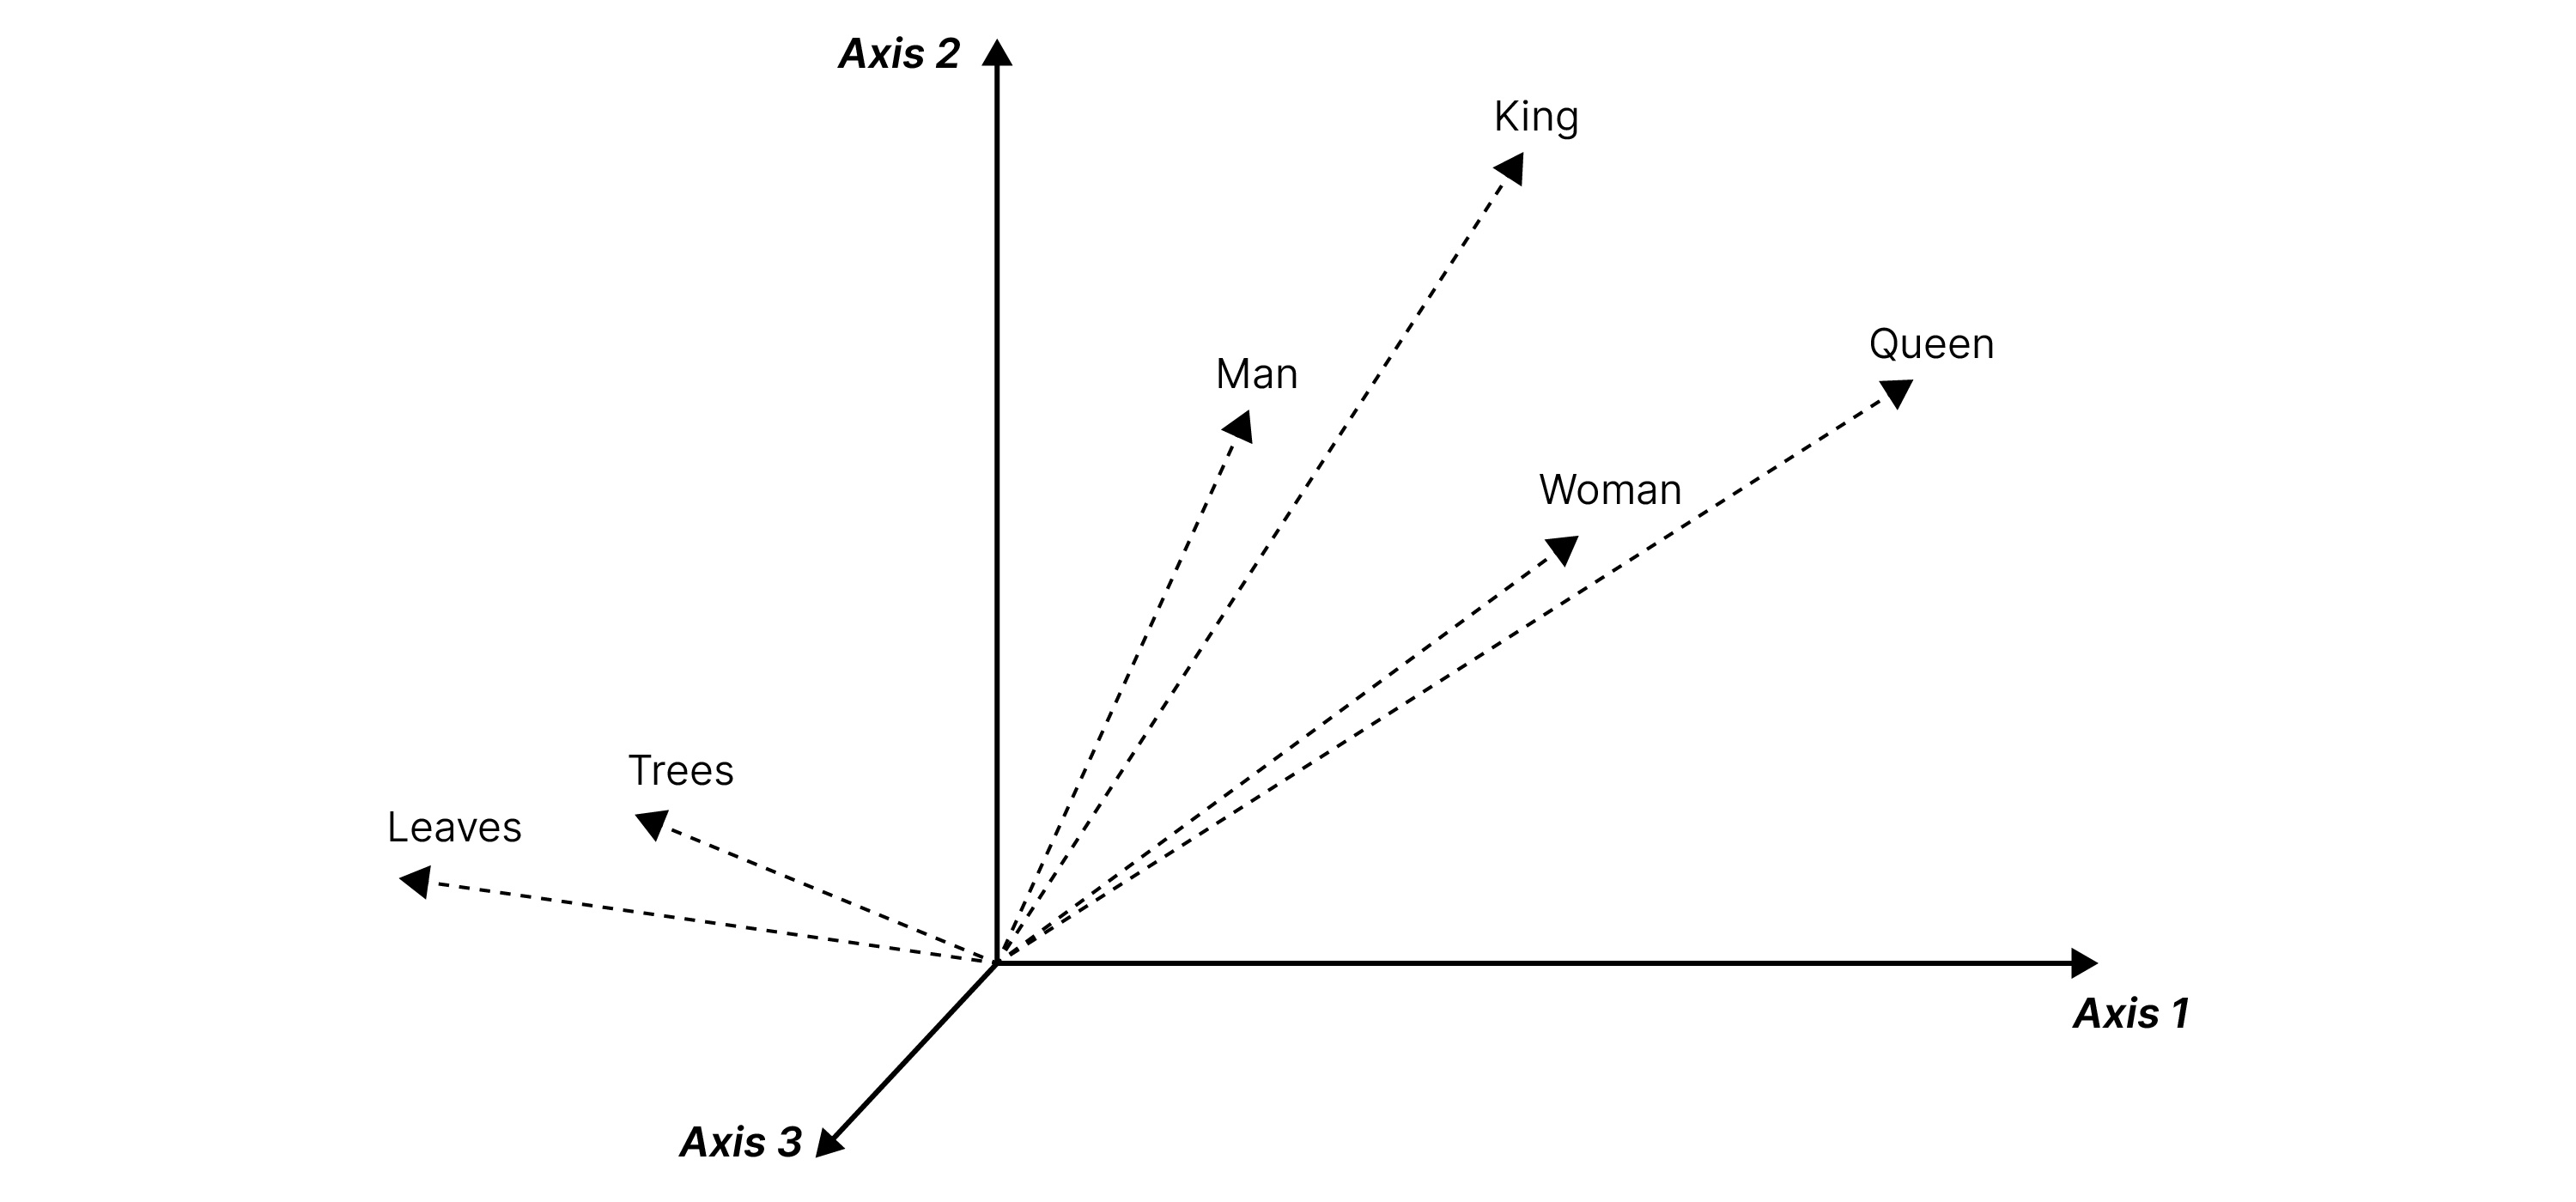 the words ‘king’ and ‘queen’ have their values close to one another in the vector space. ‘Man’ is closer to ‘king’ than ‘queen’. All these are very far from ‘leaves’, whose vector representation is closer to ‘trees’. In these embeddings, the meaning of a word is characterized by its context, or its neighboring words. This can also be applied to the study of peptides.